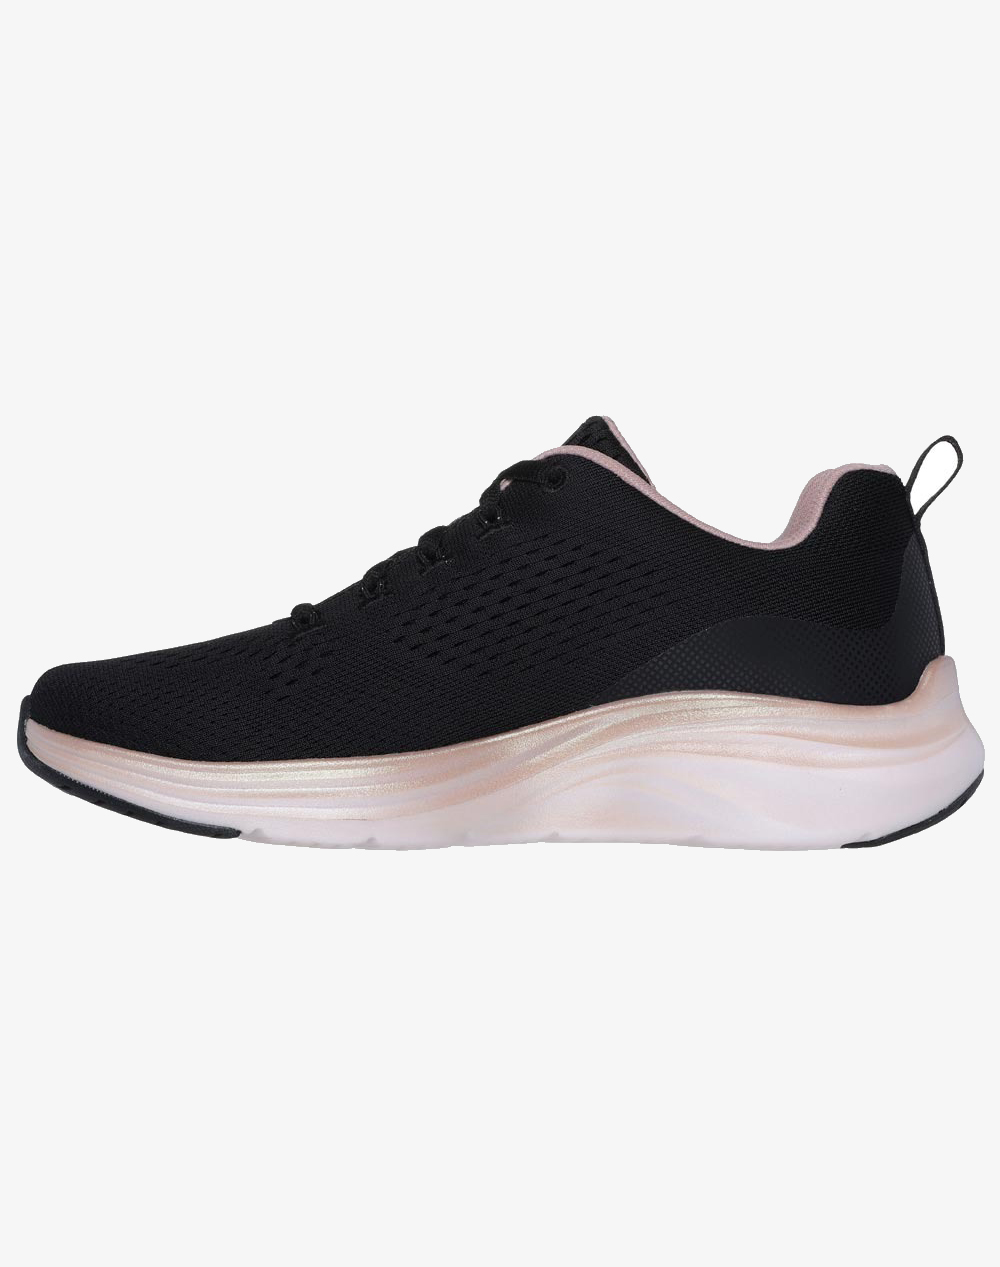 SKECHERS Engineered Mesh W/ Metallic Trim Lace-Up W/ Air-Cooled Mf